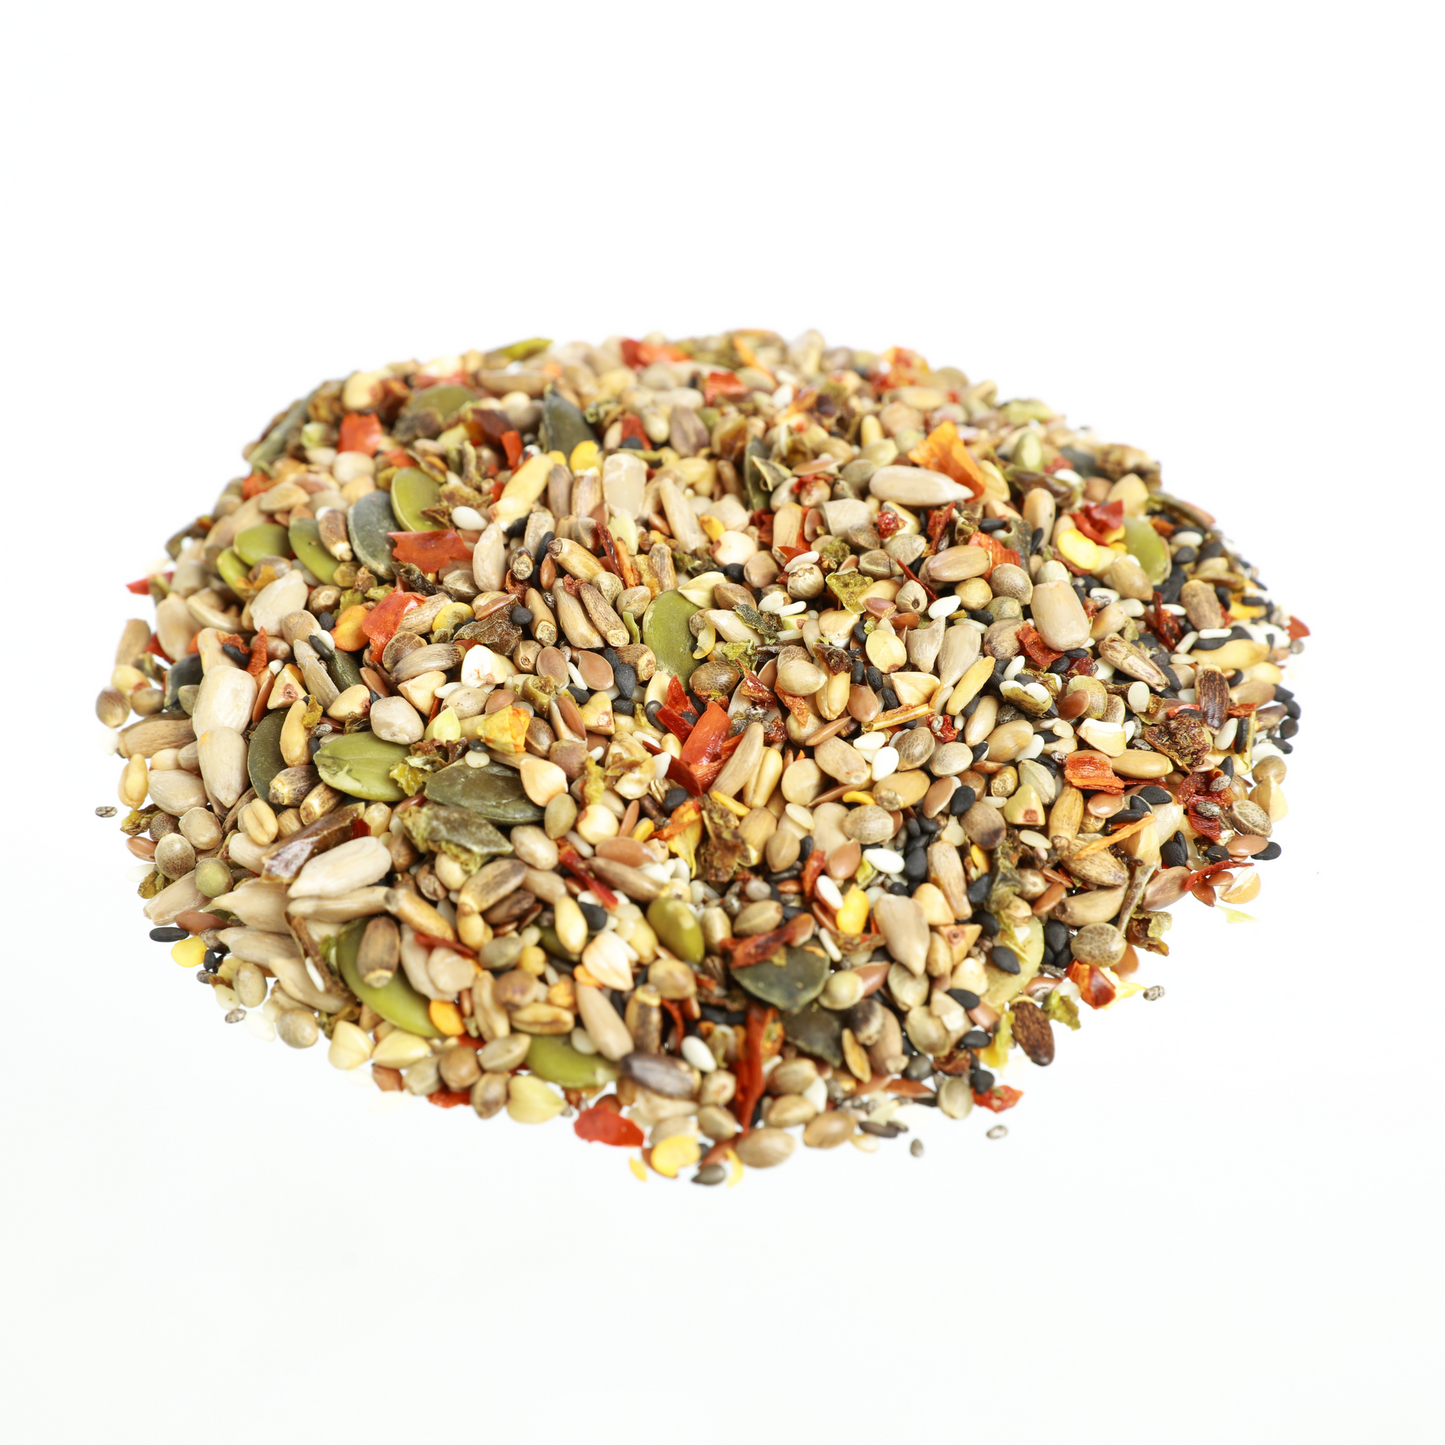 Spicy Seed Mix - Sample 50g